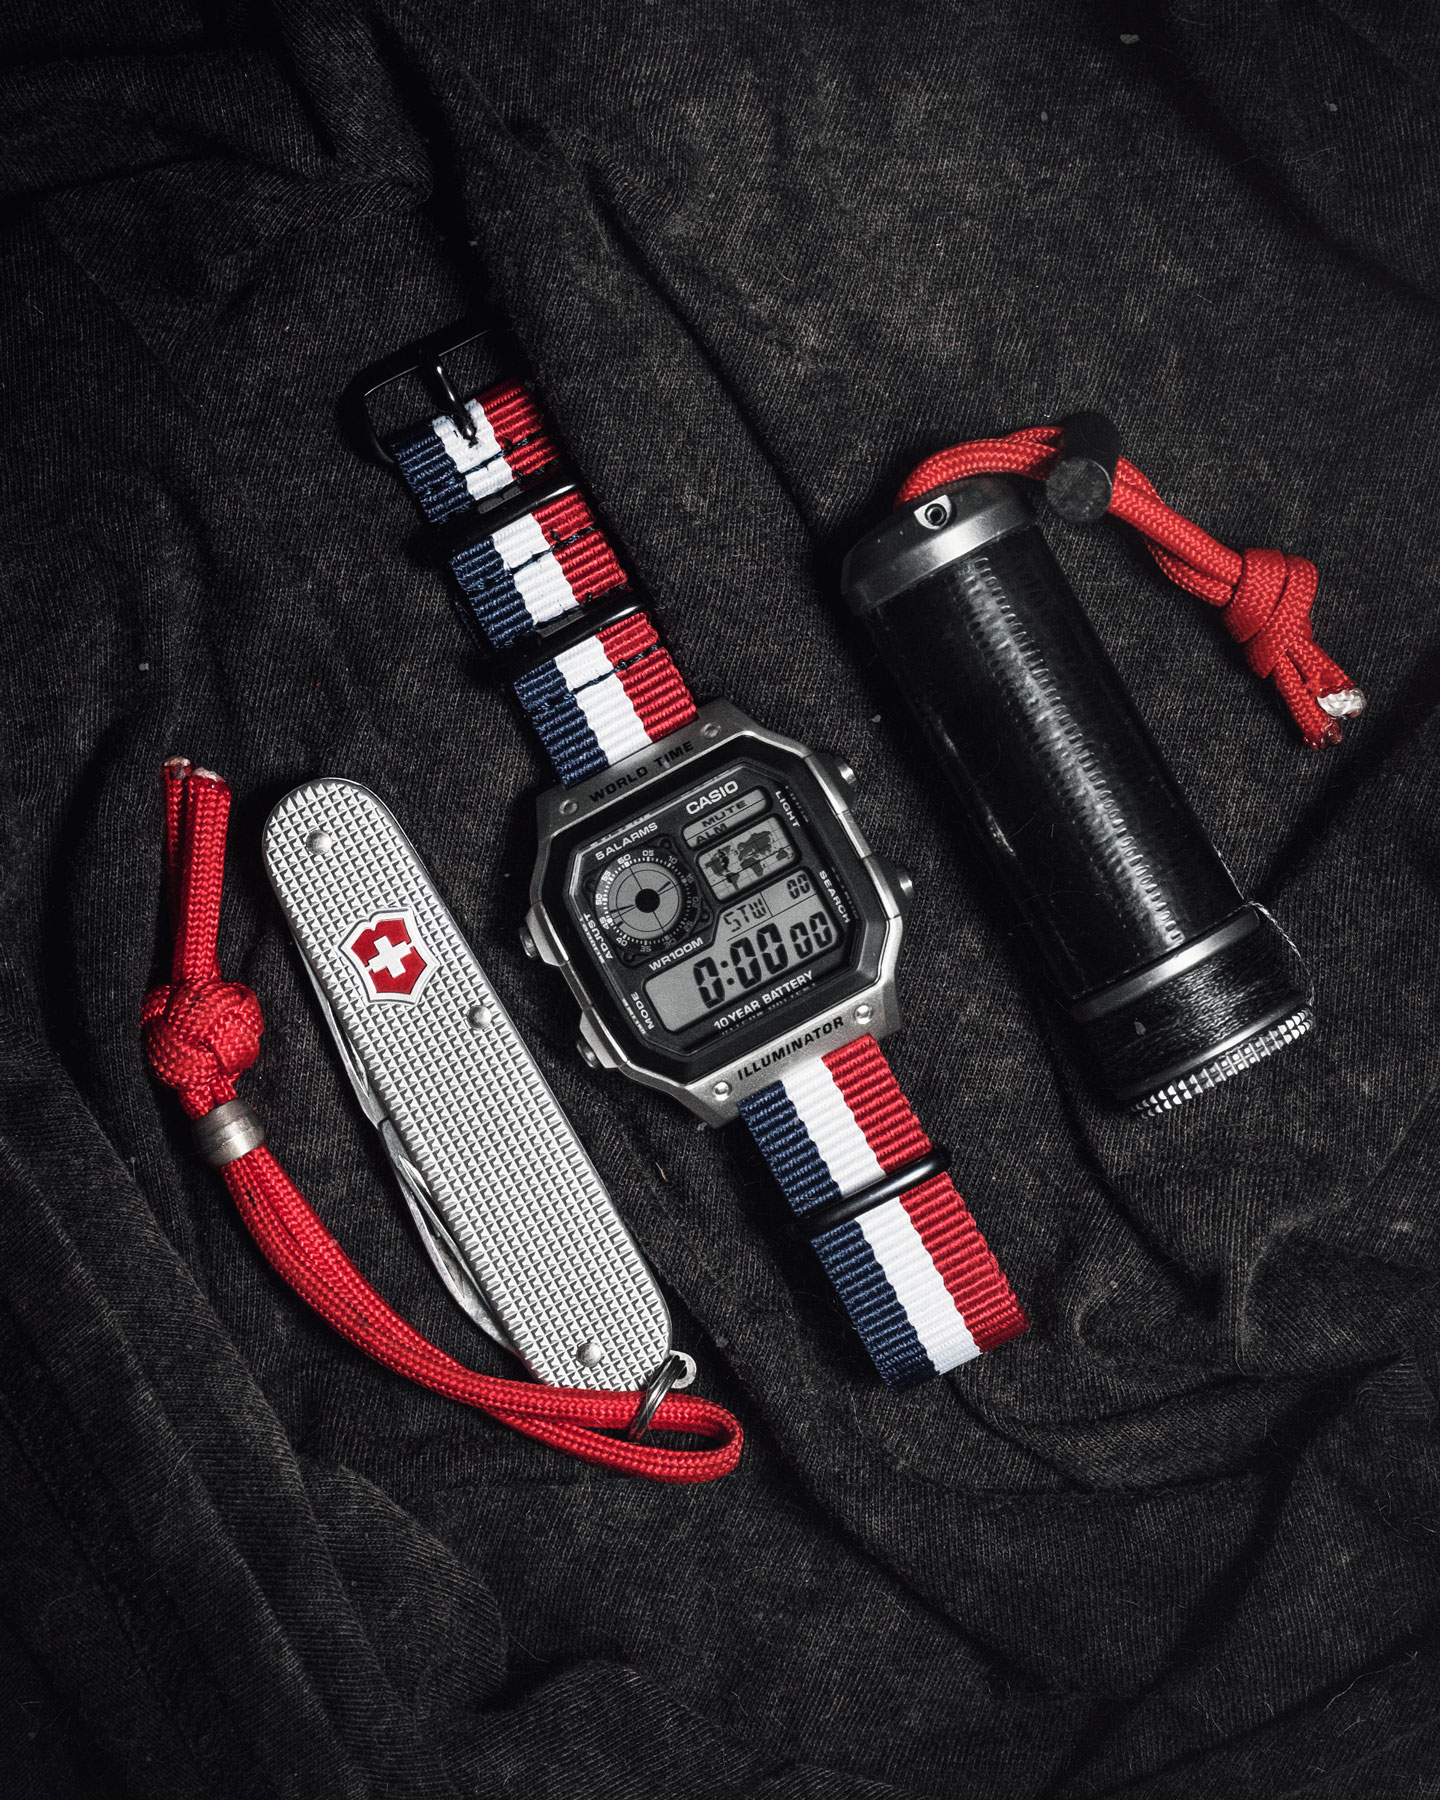 Casio 1200 Nato Strap • Making this iconic watch even better!